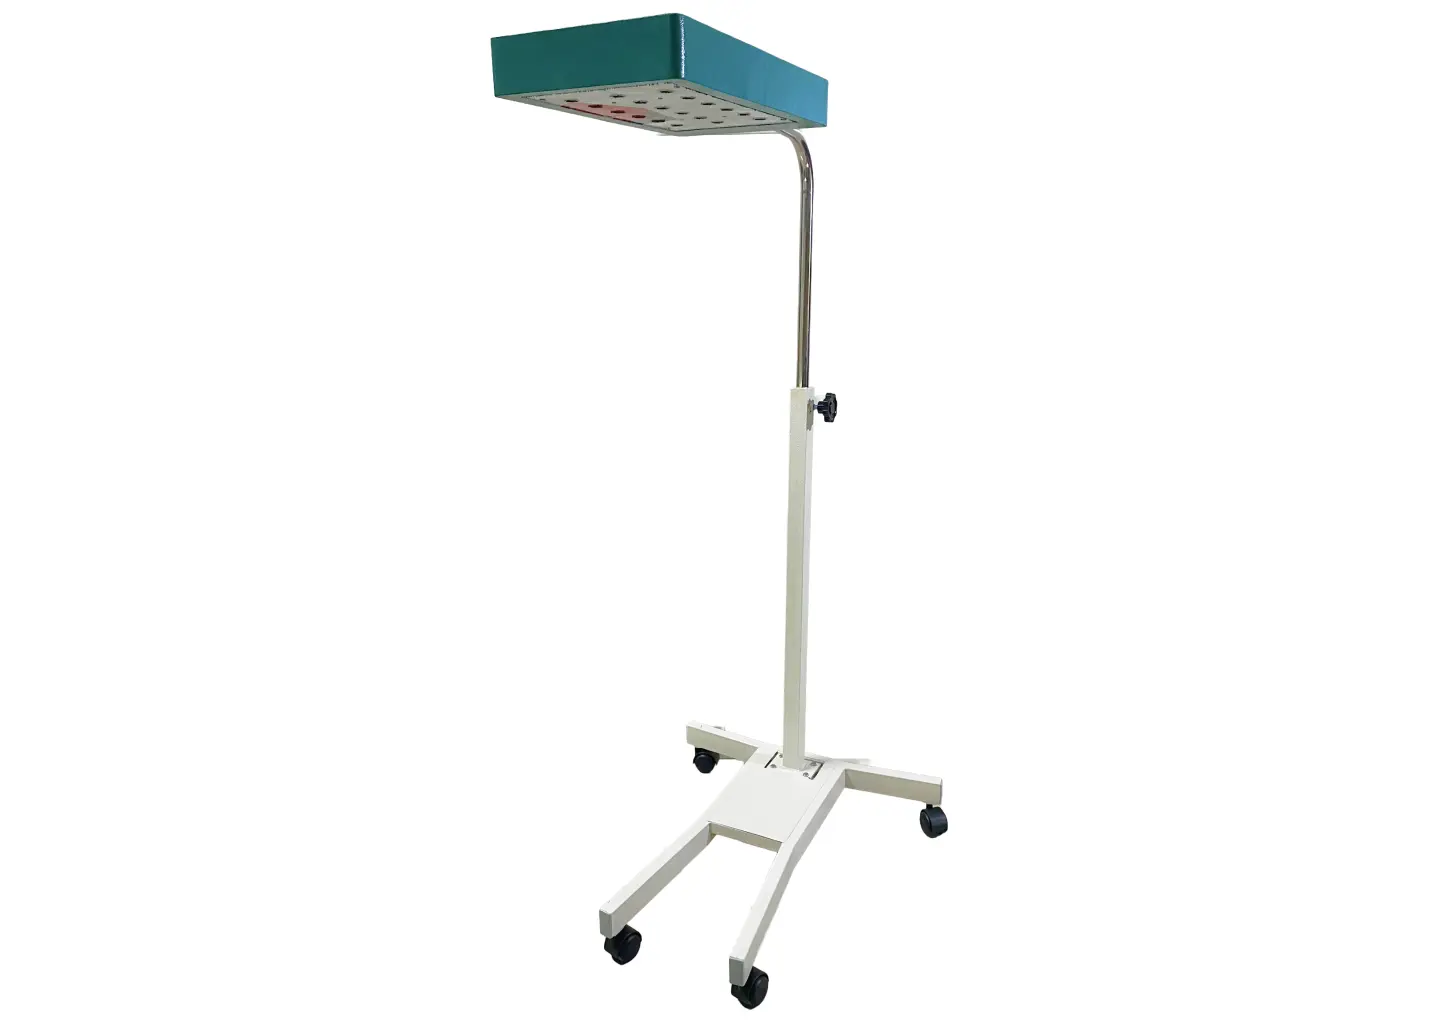 Aura Care's Only Stand LED Phototherapy Unit